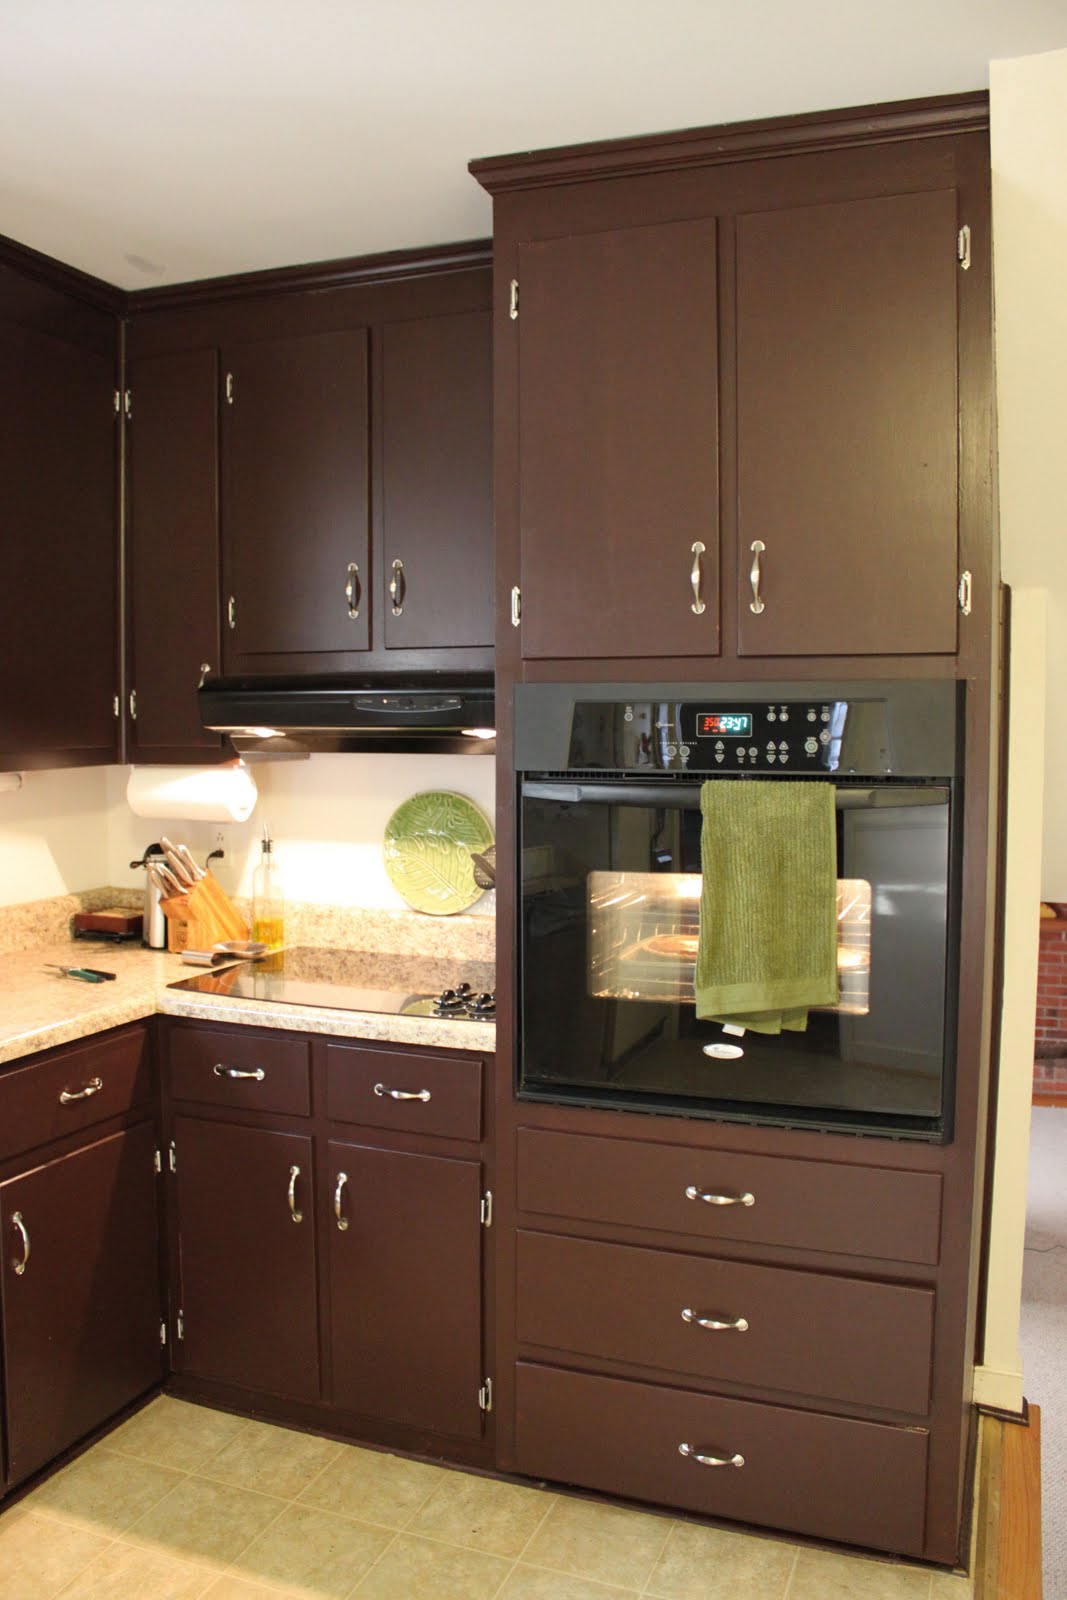 Top 11 Used Kitchen Cabinets Ideas To Save You Money